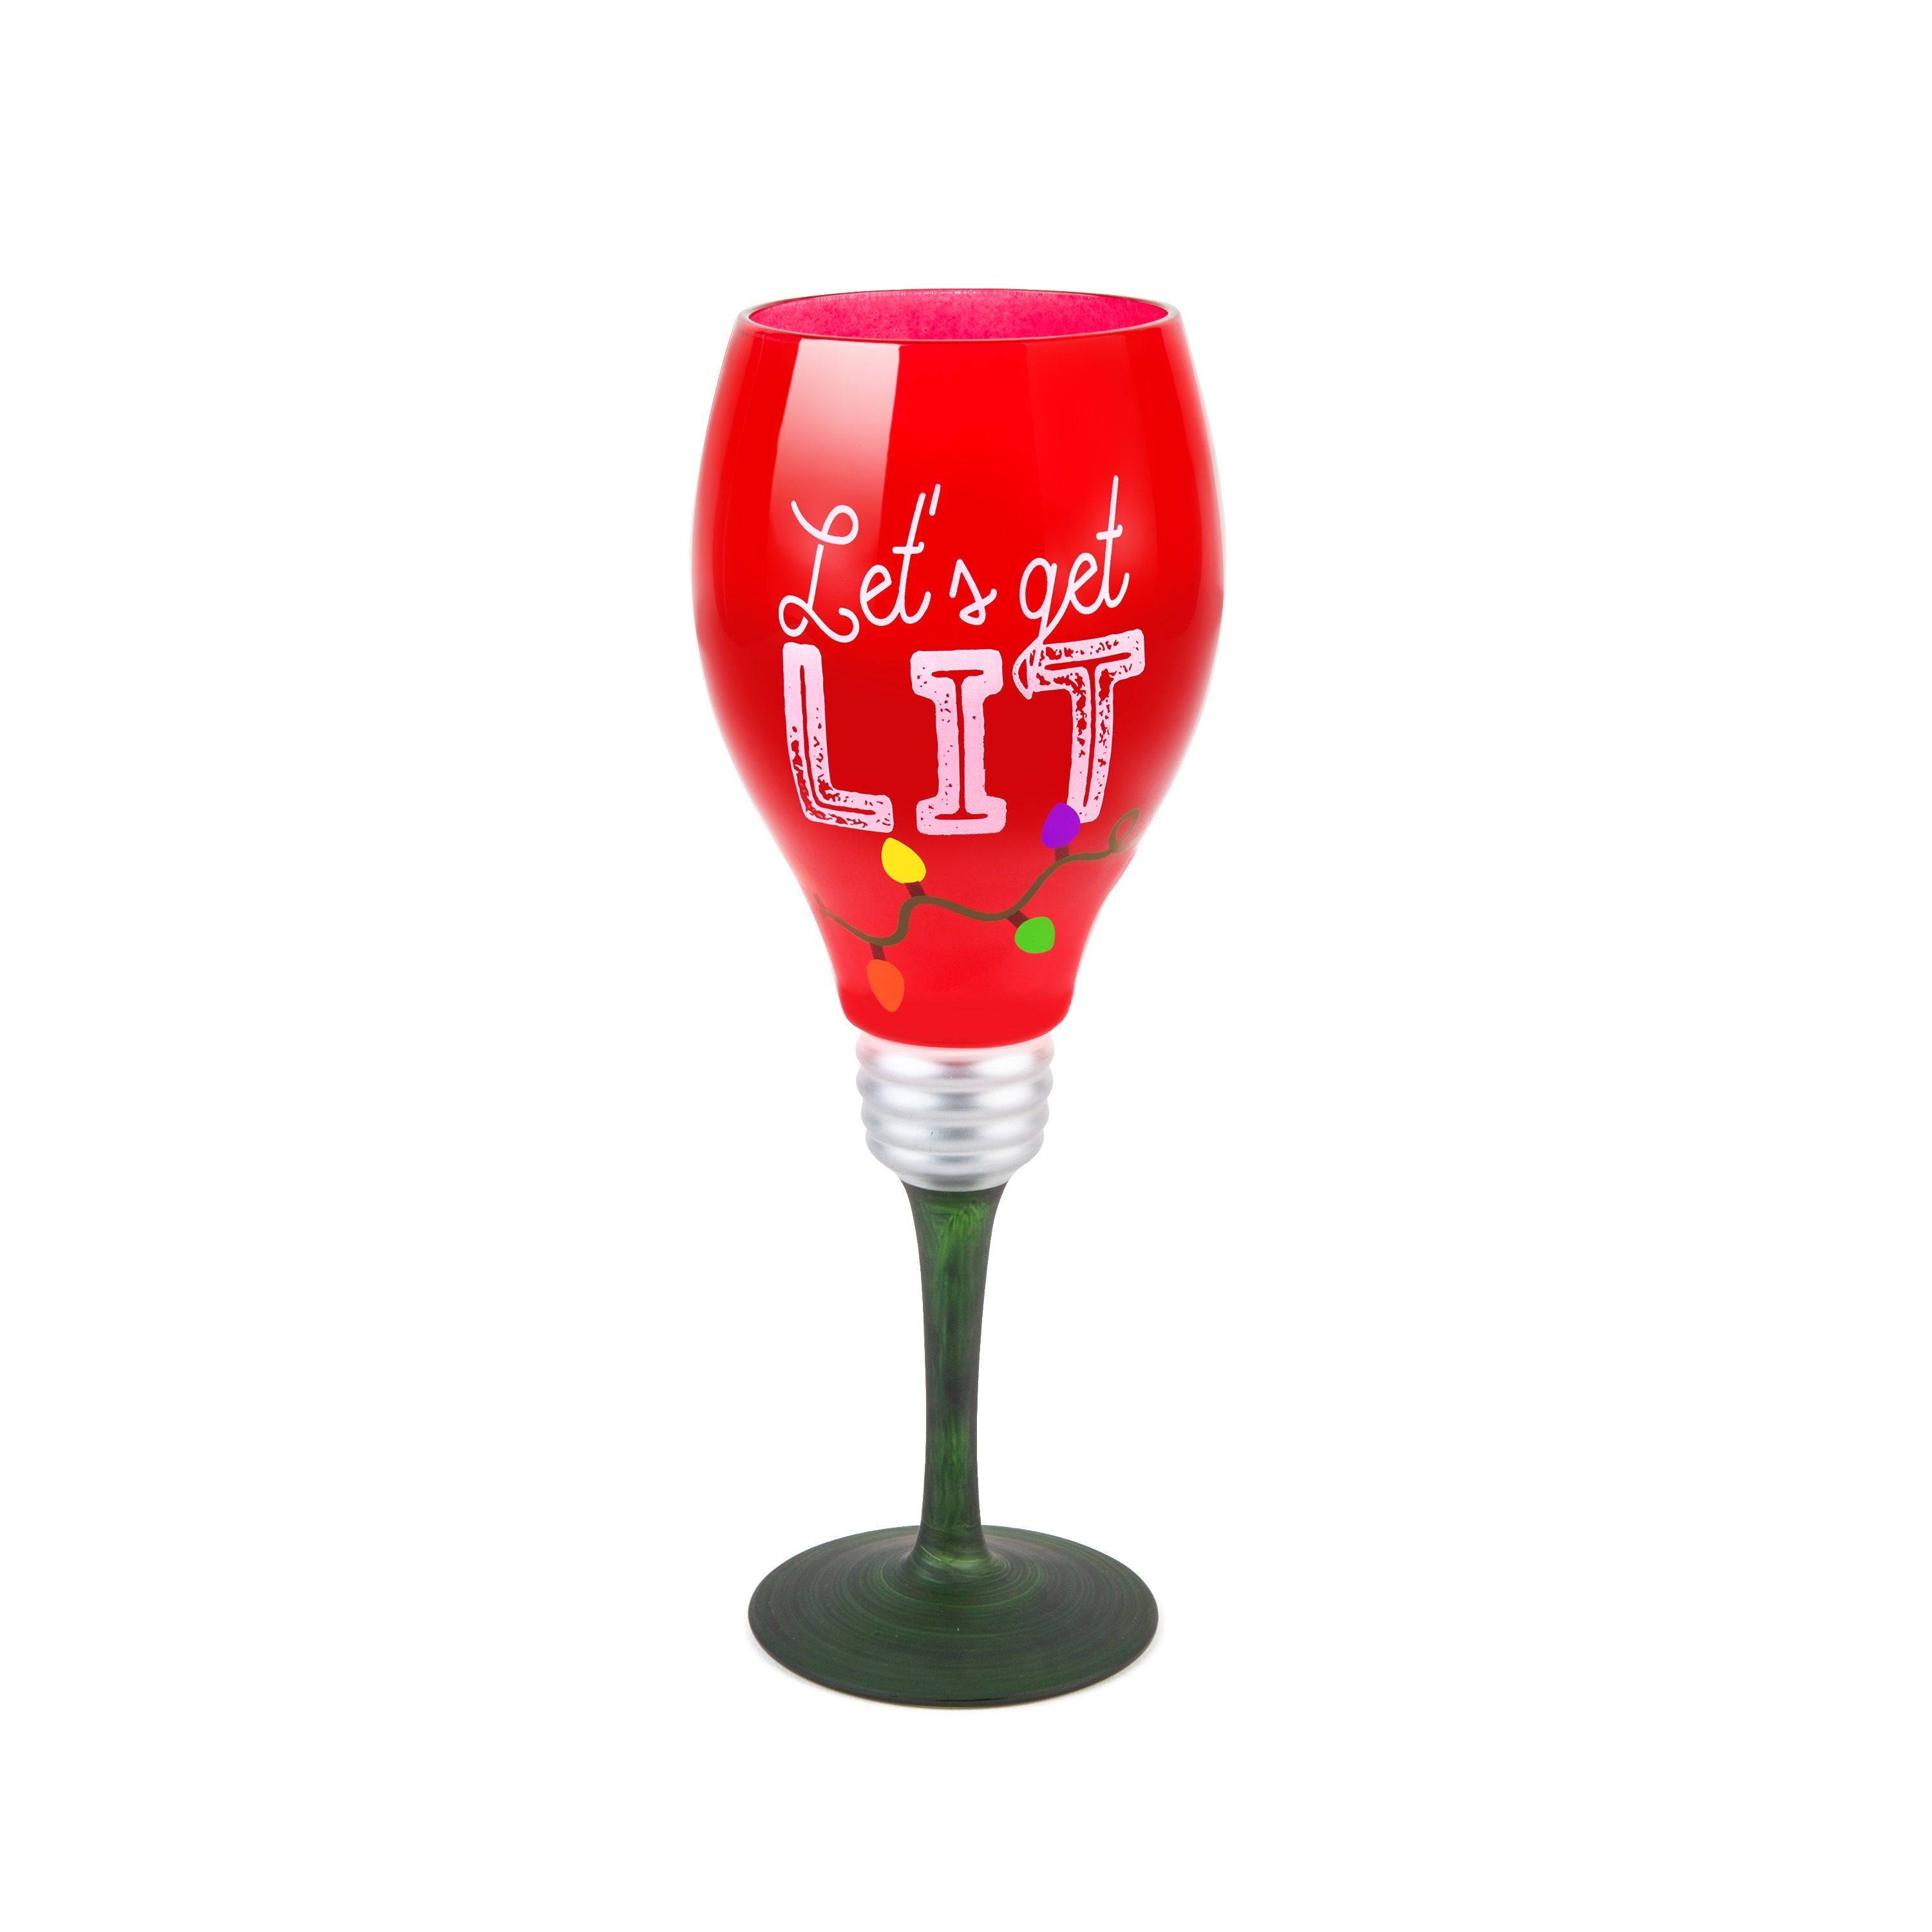 The Get Lit Holiday Wine Glass